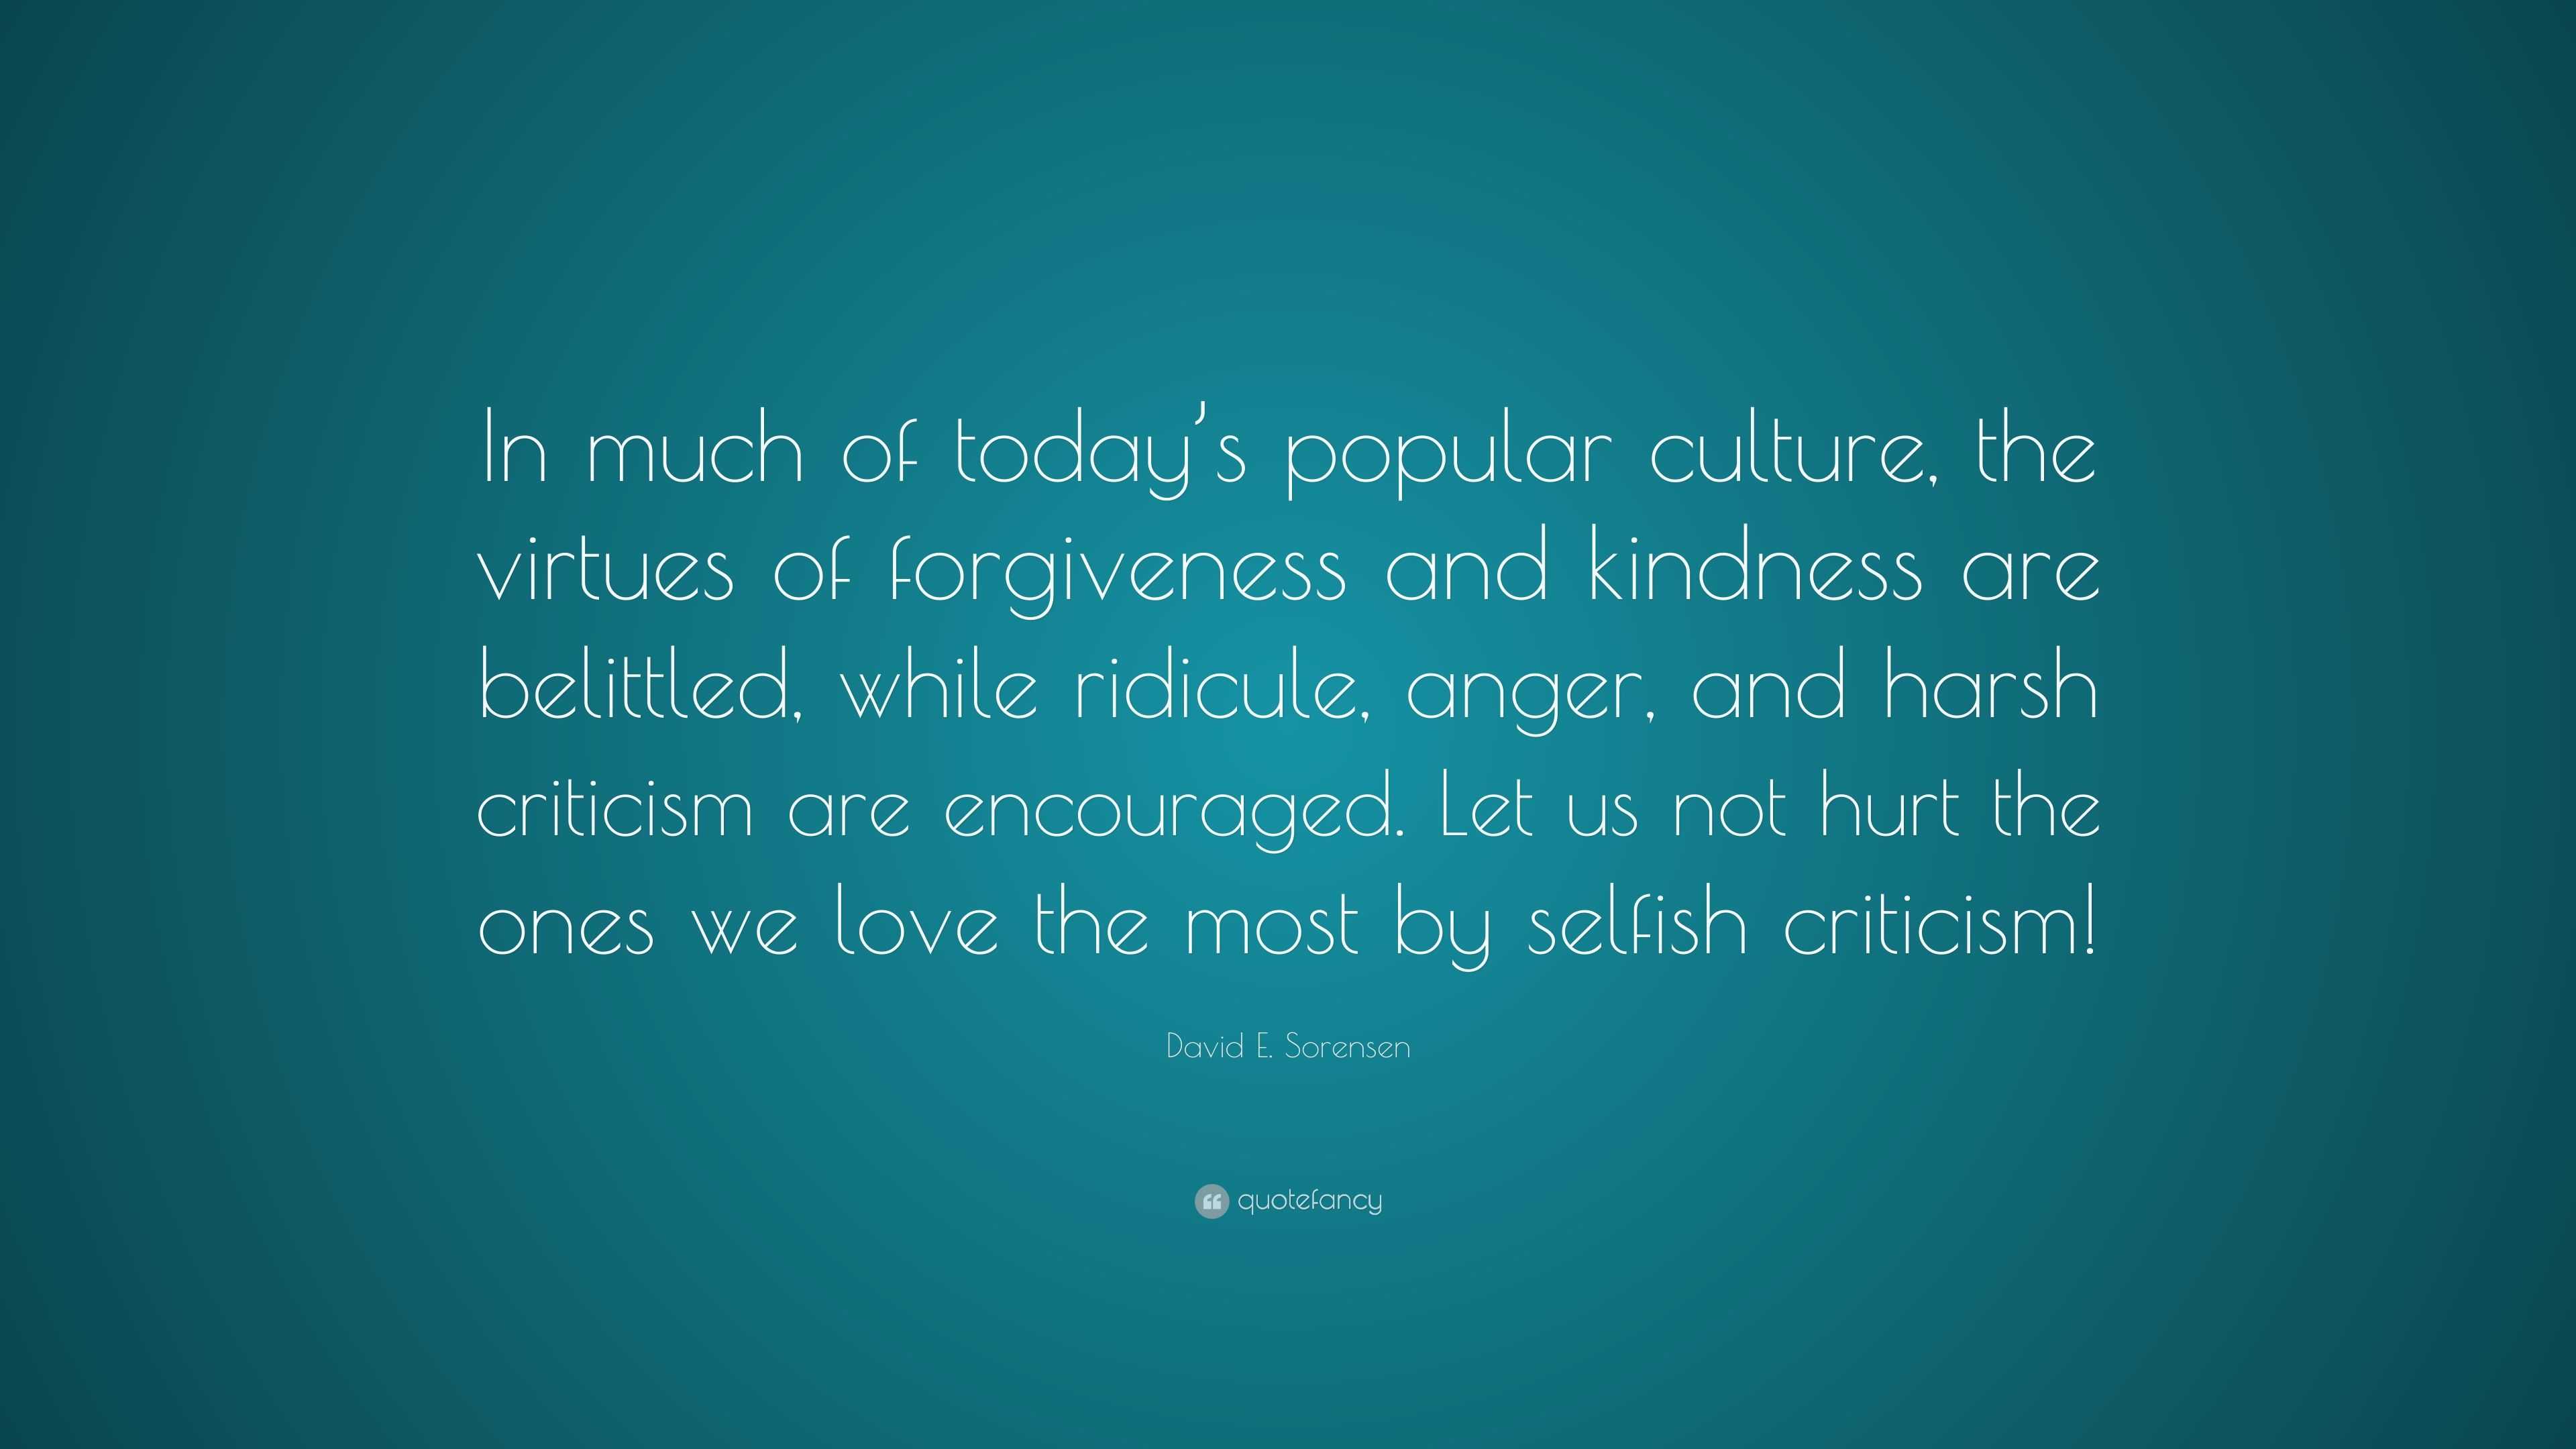 David E Sorensen Quote “In much of today s popular culture the virtues